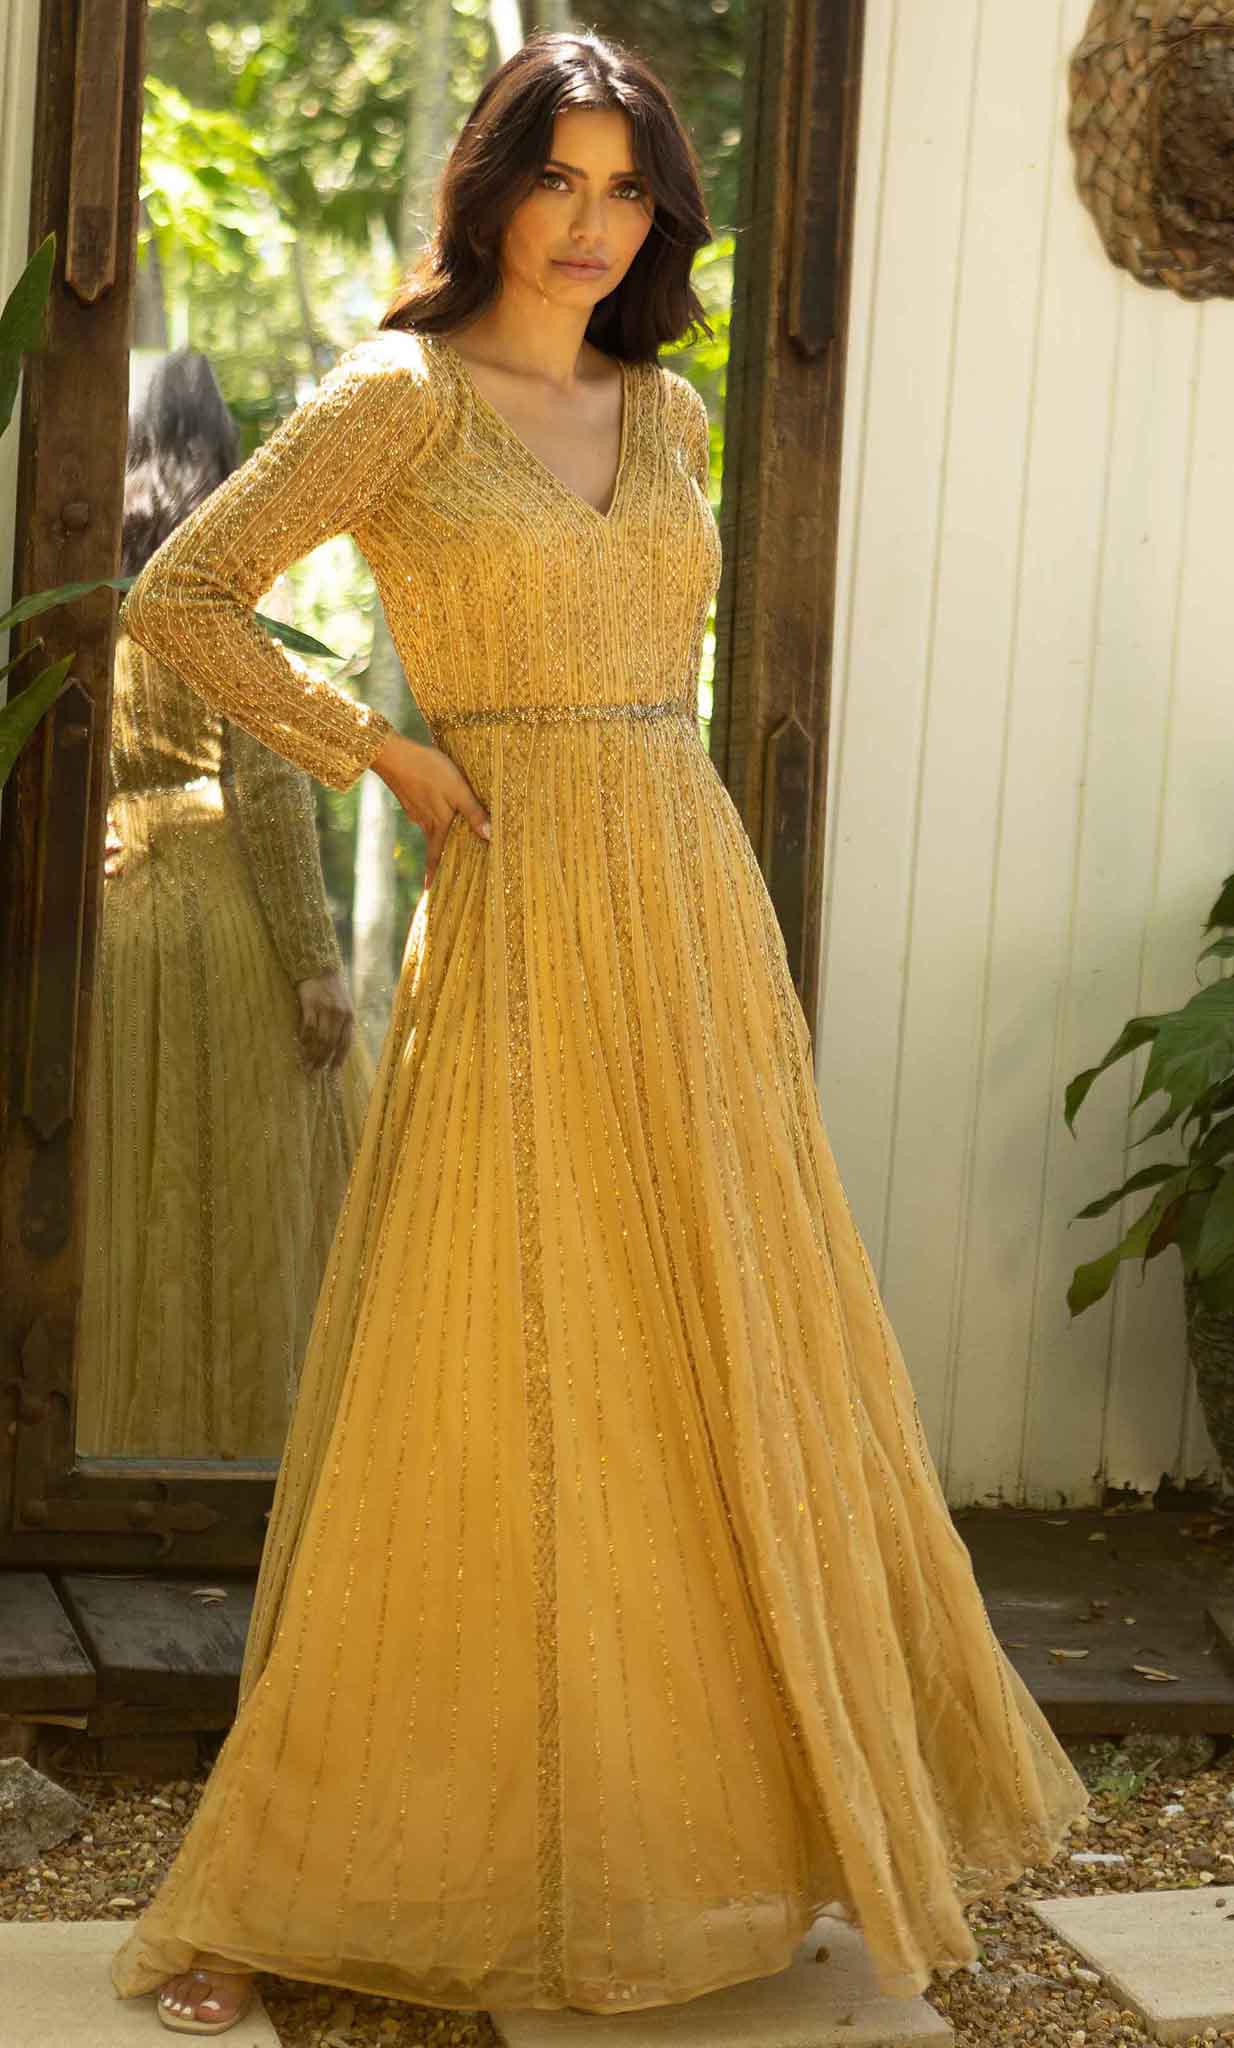 Image of Primavera Couture 12010 - Modest Long Sleeve A-line Gown